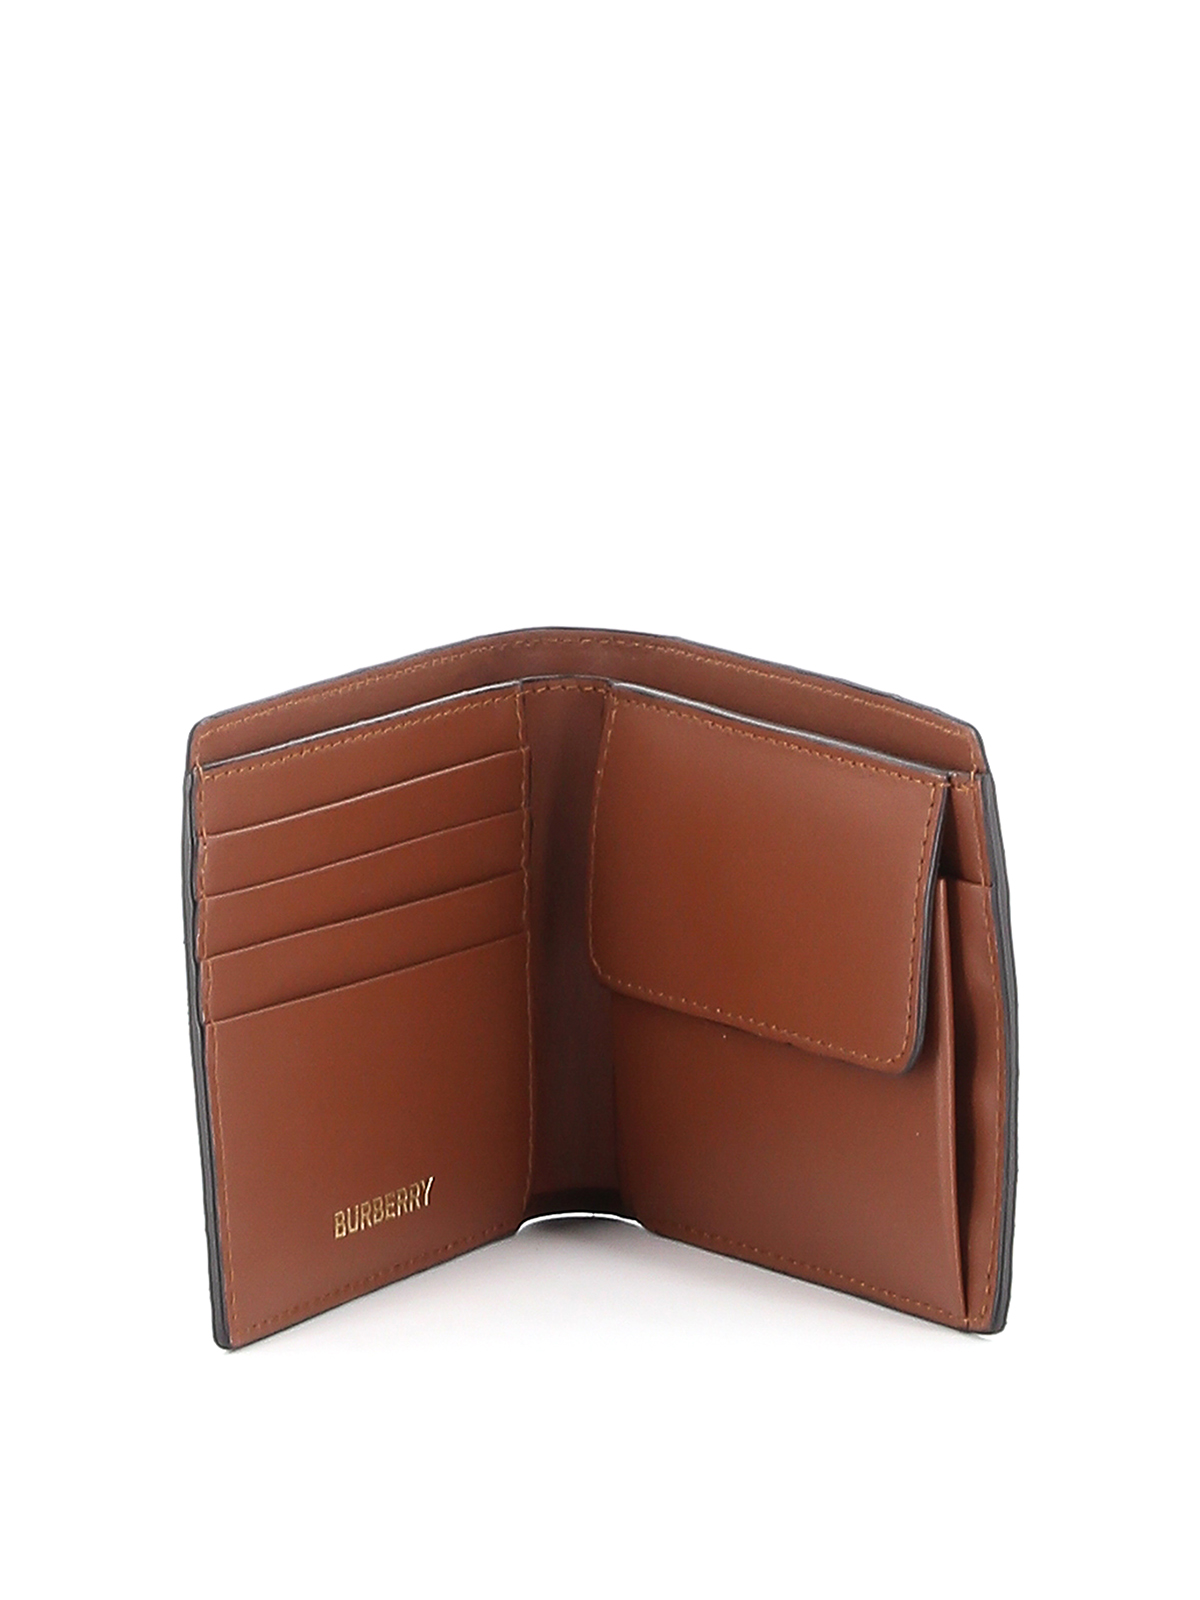 Burberry TB Trifold Wallet